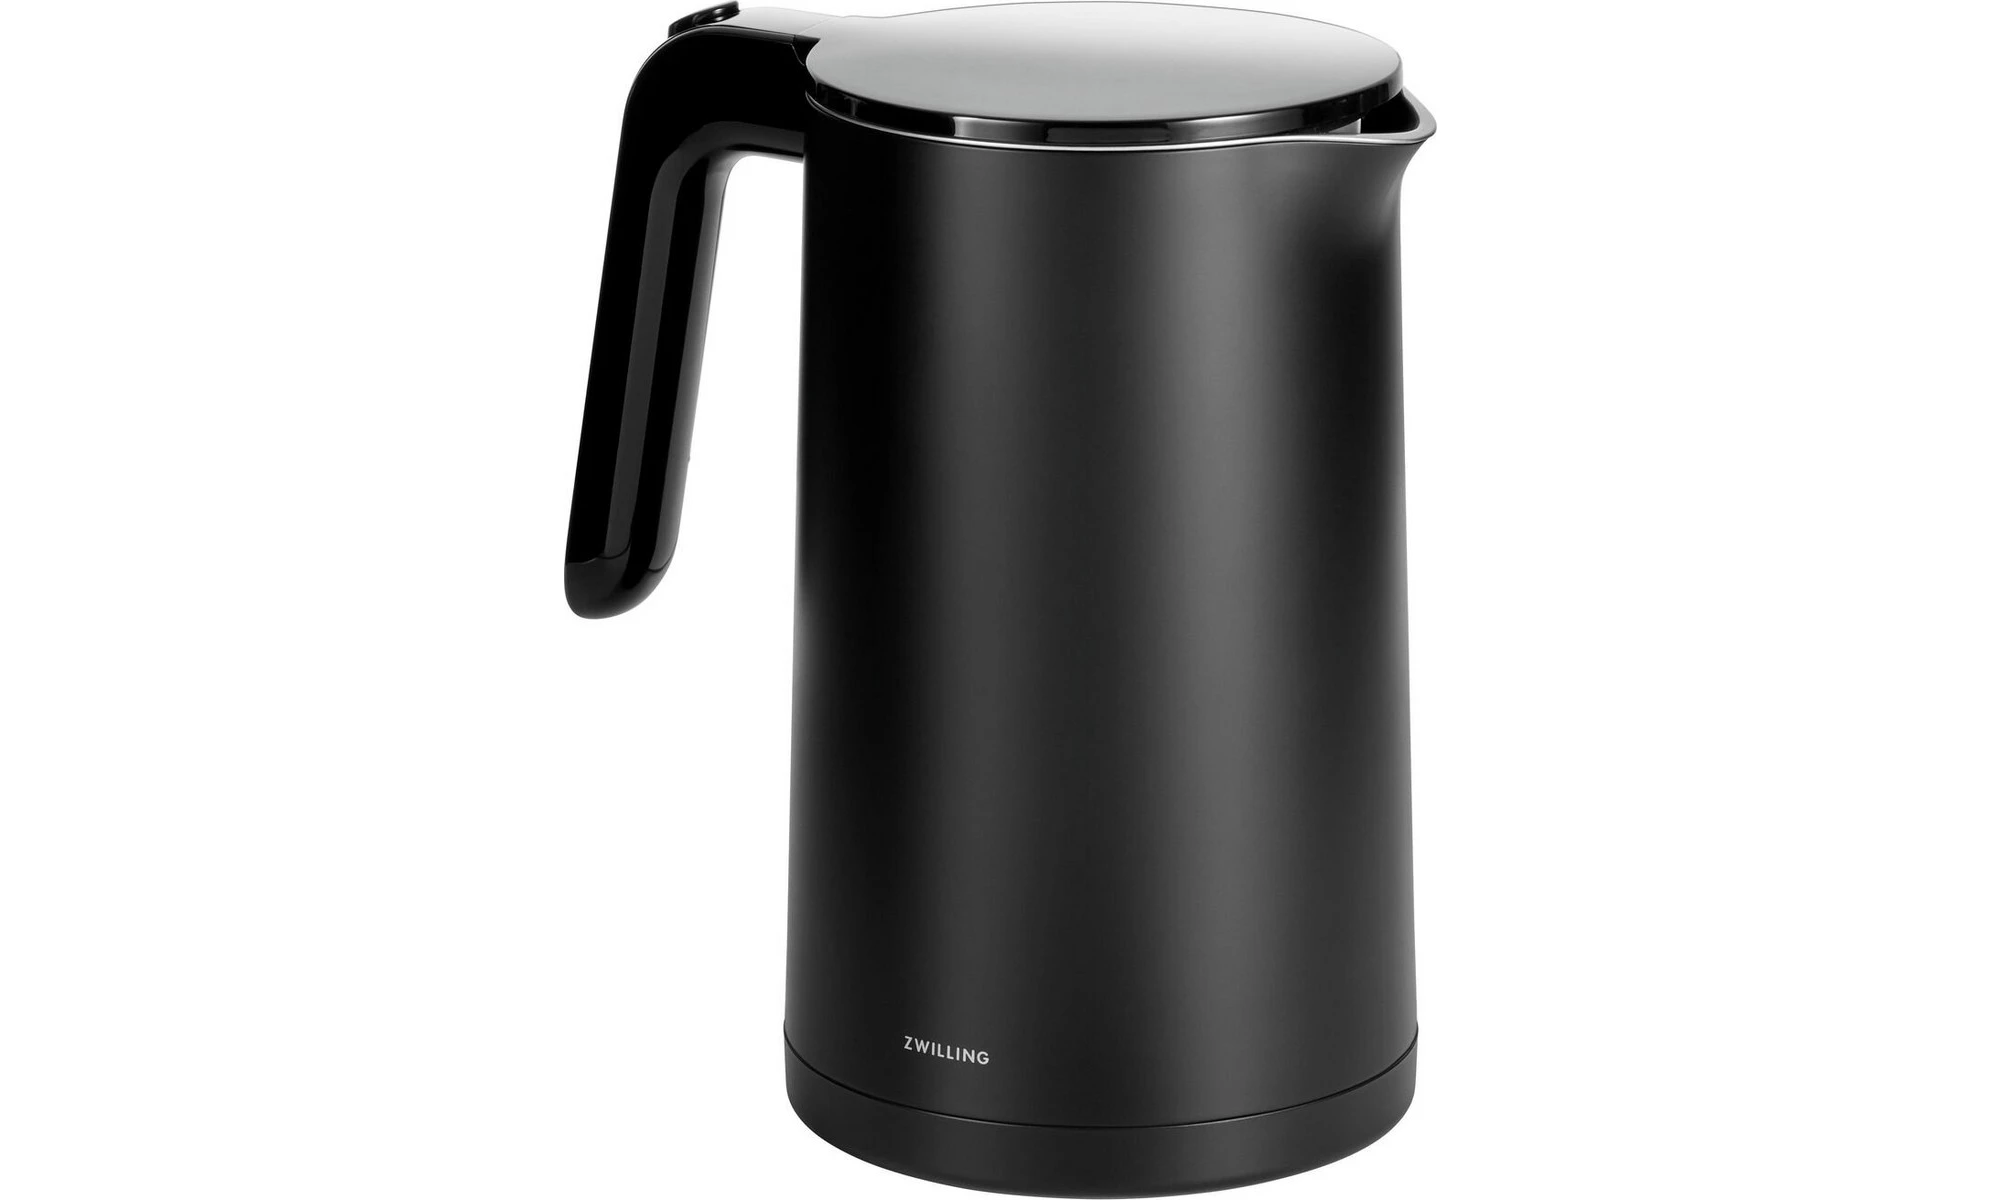 Enfinigy Electric kettle 1,5 l silver - Zwilling 53005-000-0